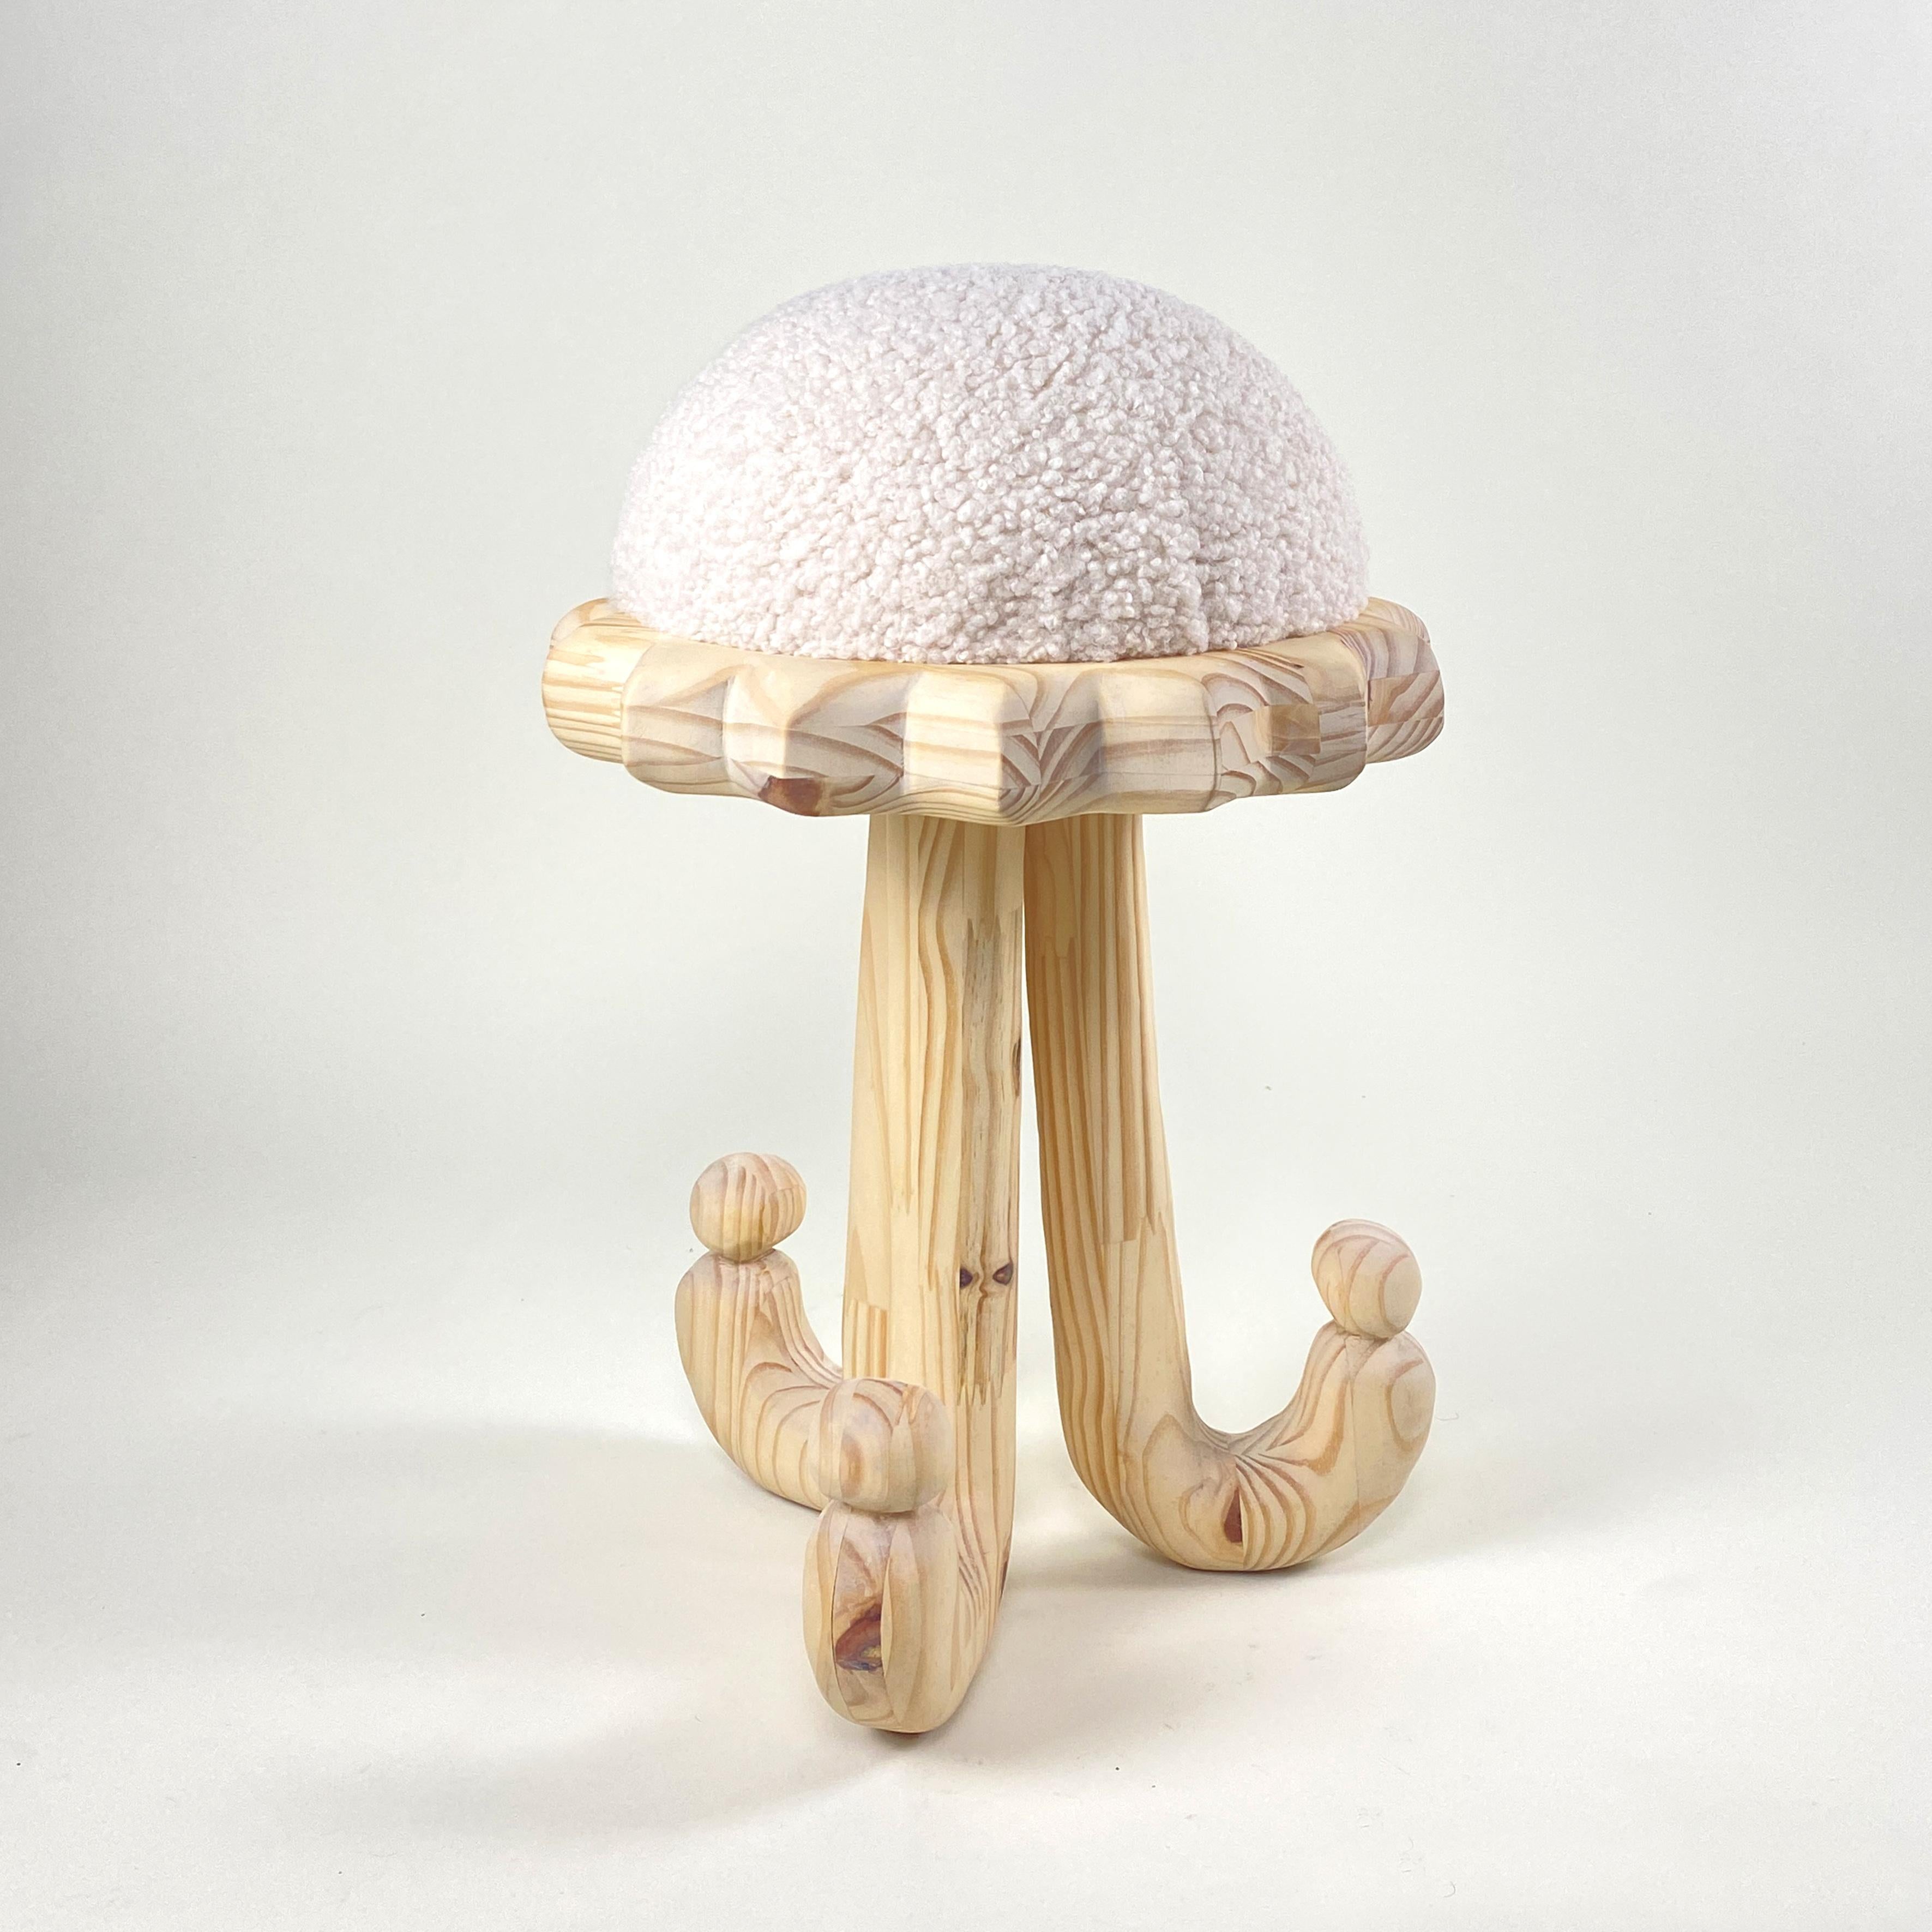 French JoJoJo hand carved by hand wood stool, edition by artist Alix Coco For Sale